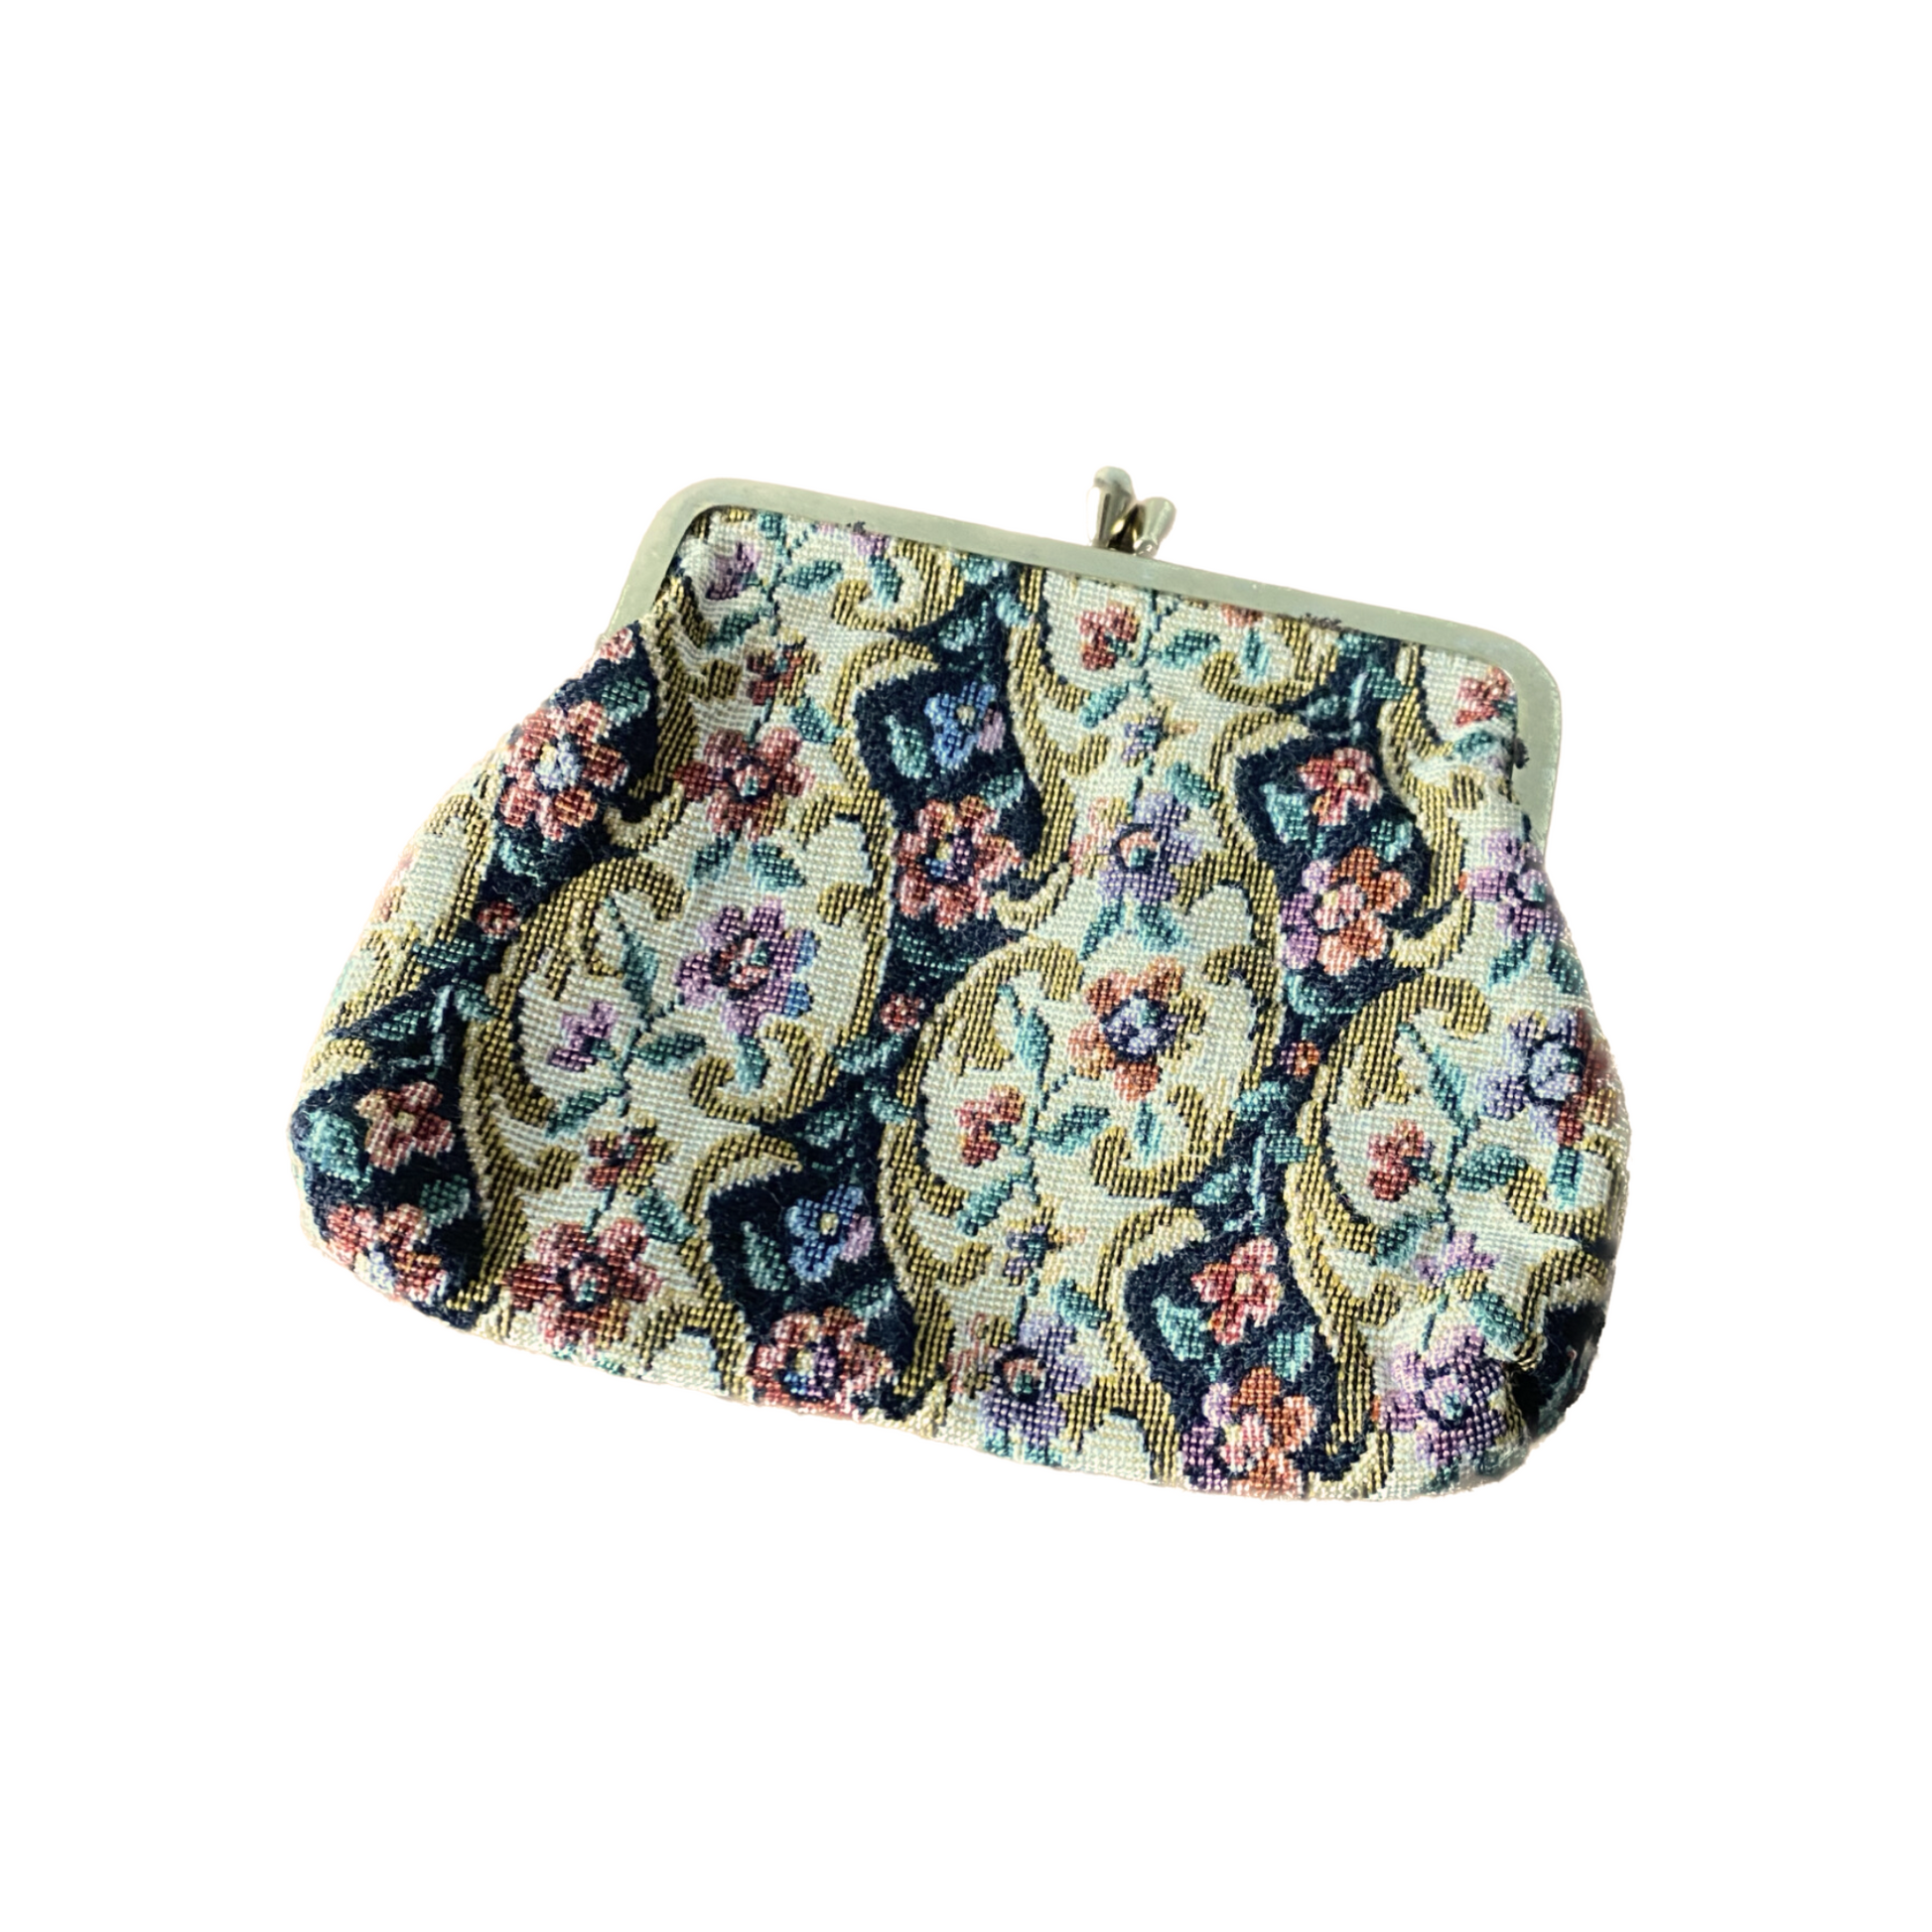 Vintage embroidered flower cosmetic purse with waterproof lining 